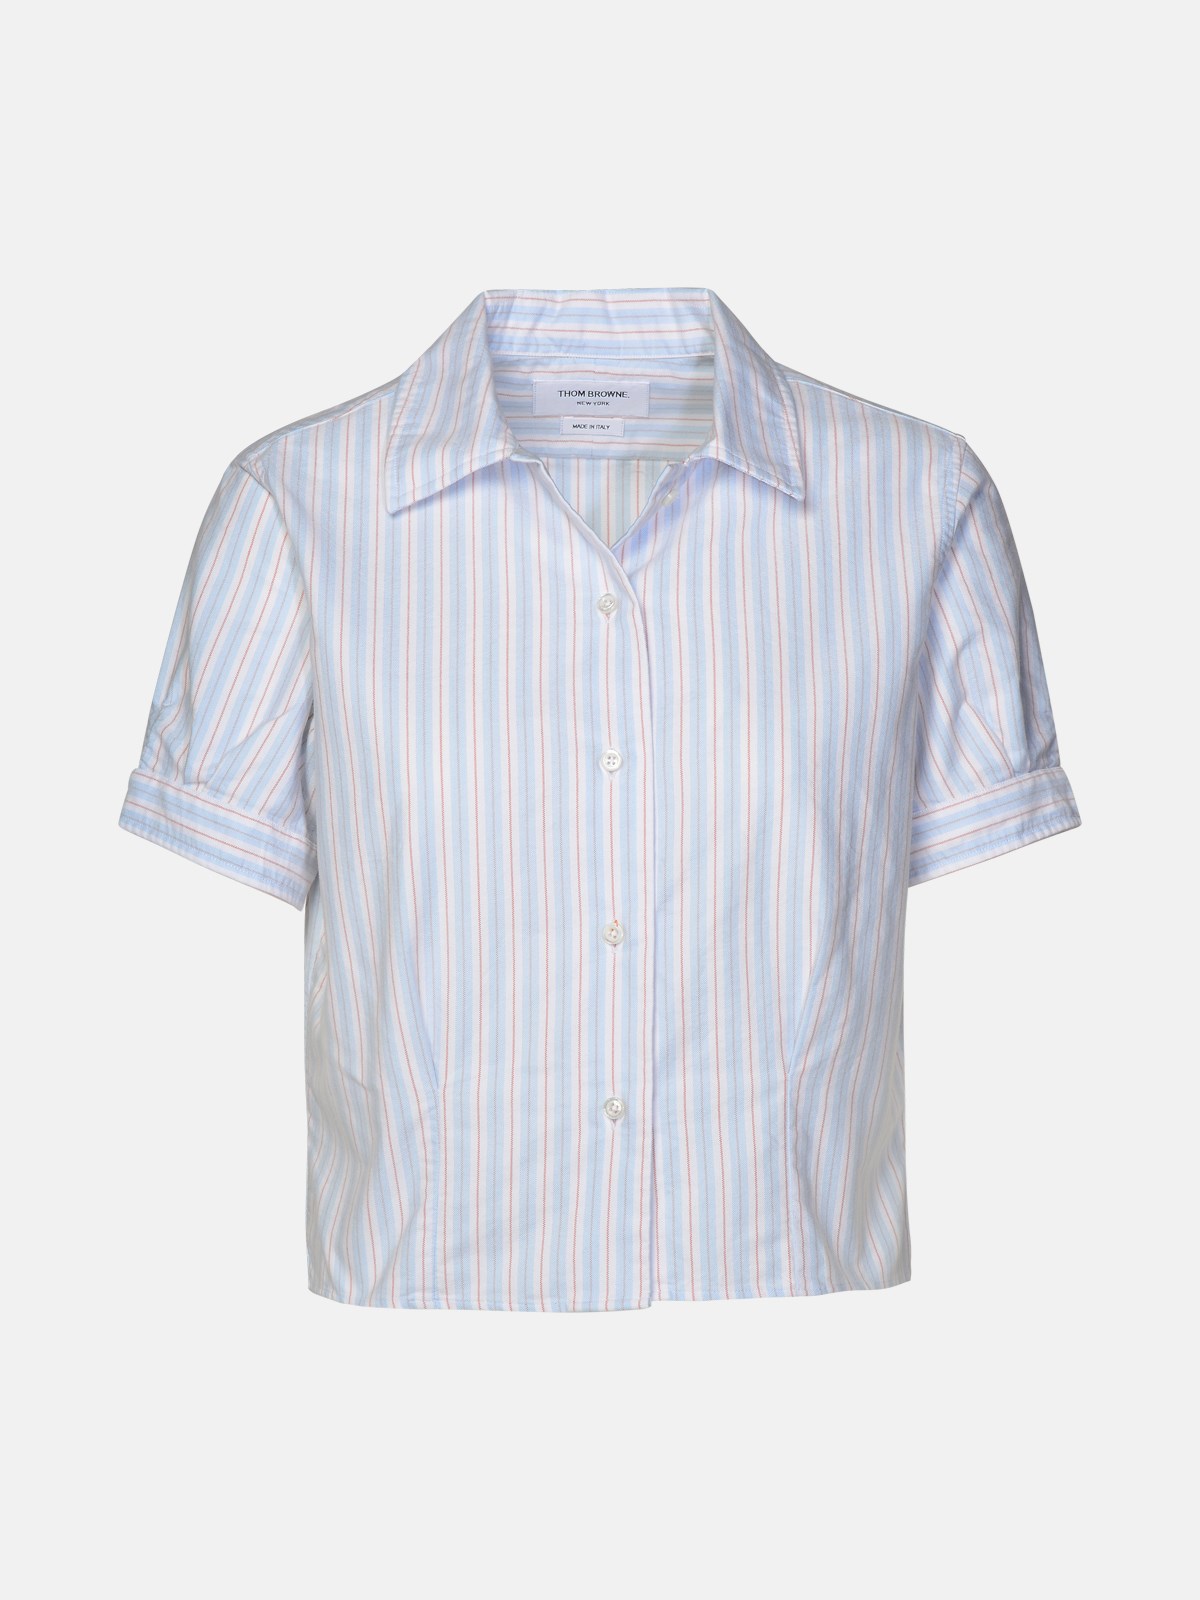 Thom Browne Multicolor Cotton Shirt In Light Blue